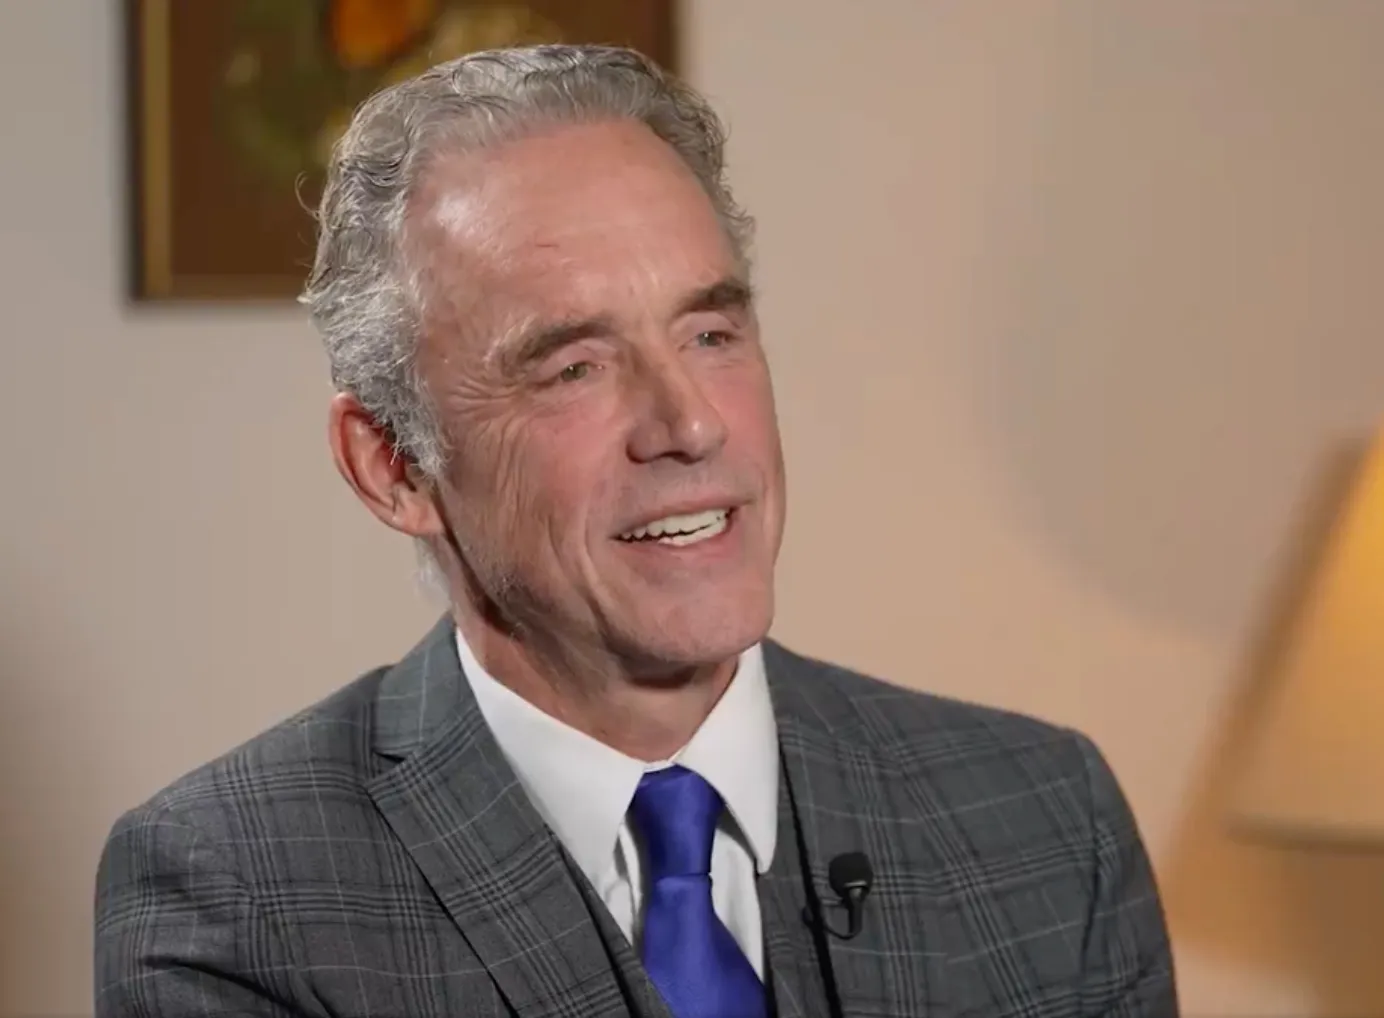 Psychologist and author Dr. Jordan Peterson speaks to EWTN News In Depth's Colm Flynn as Peterson's wife, Tammy, joins the Catholic Church.?w=200&h=150